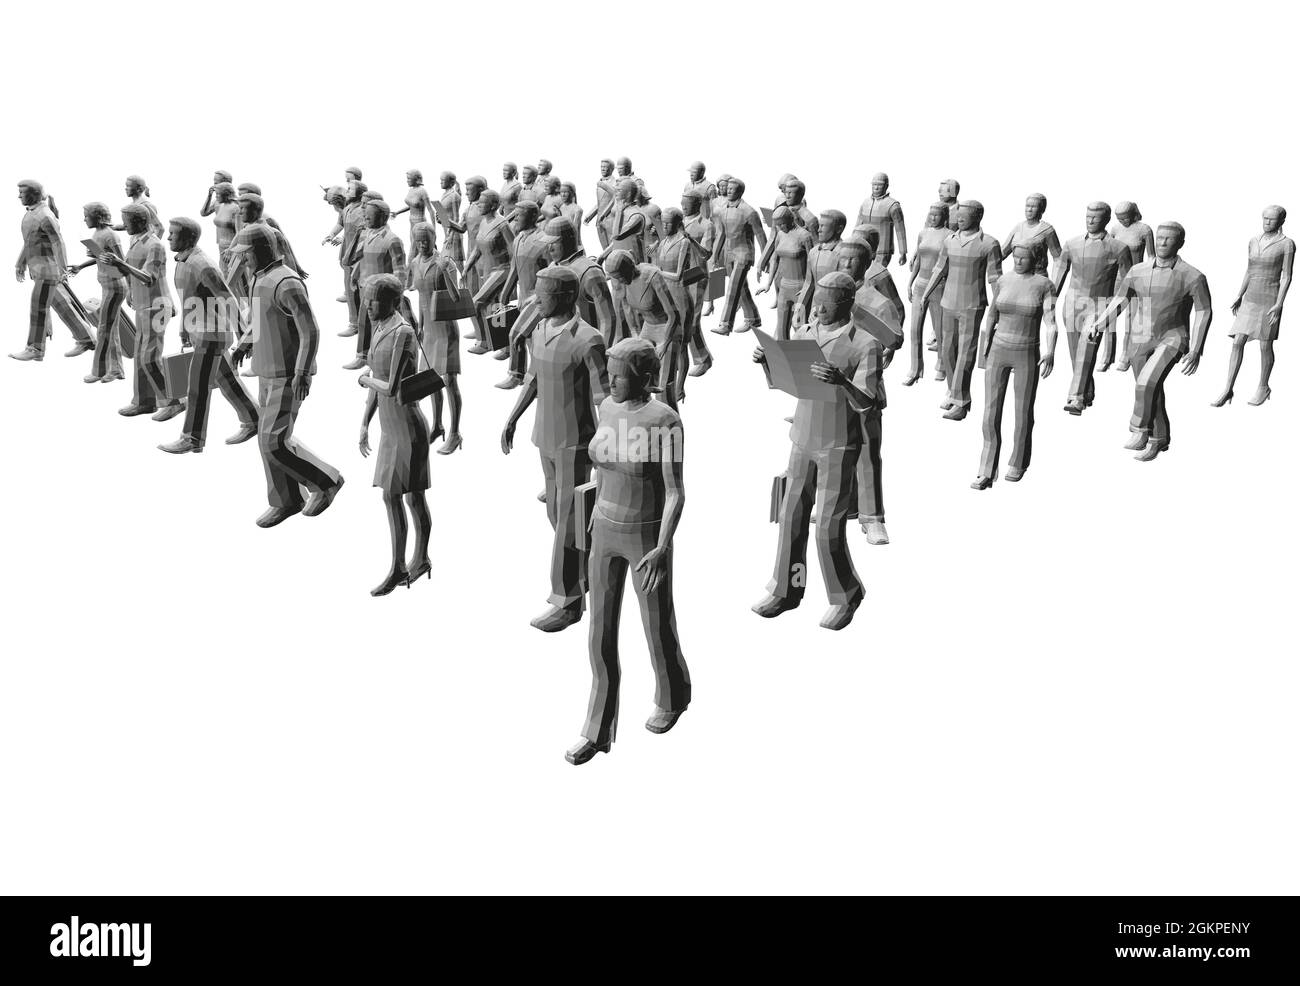 13,177 Standing Long Line Images, Stock Photos, 3D objects, & Vectors